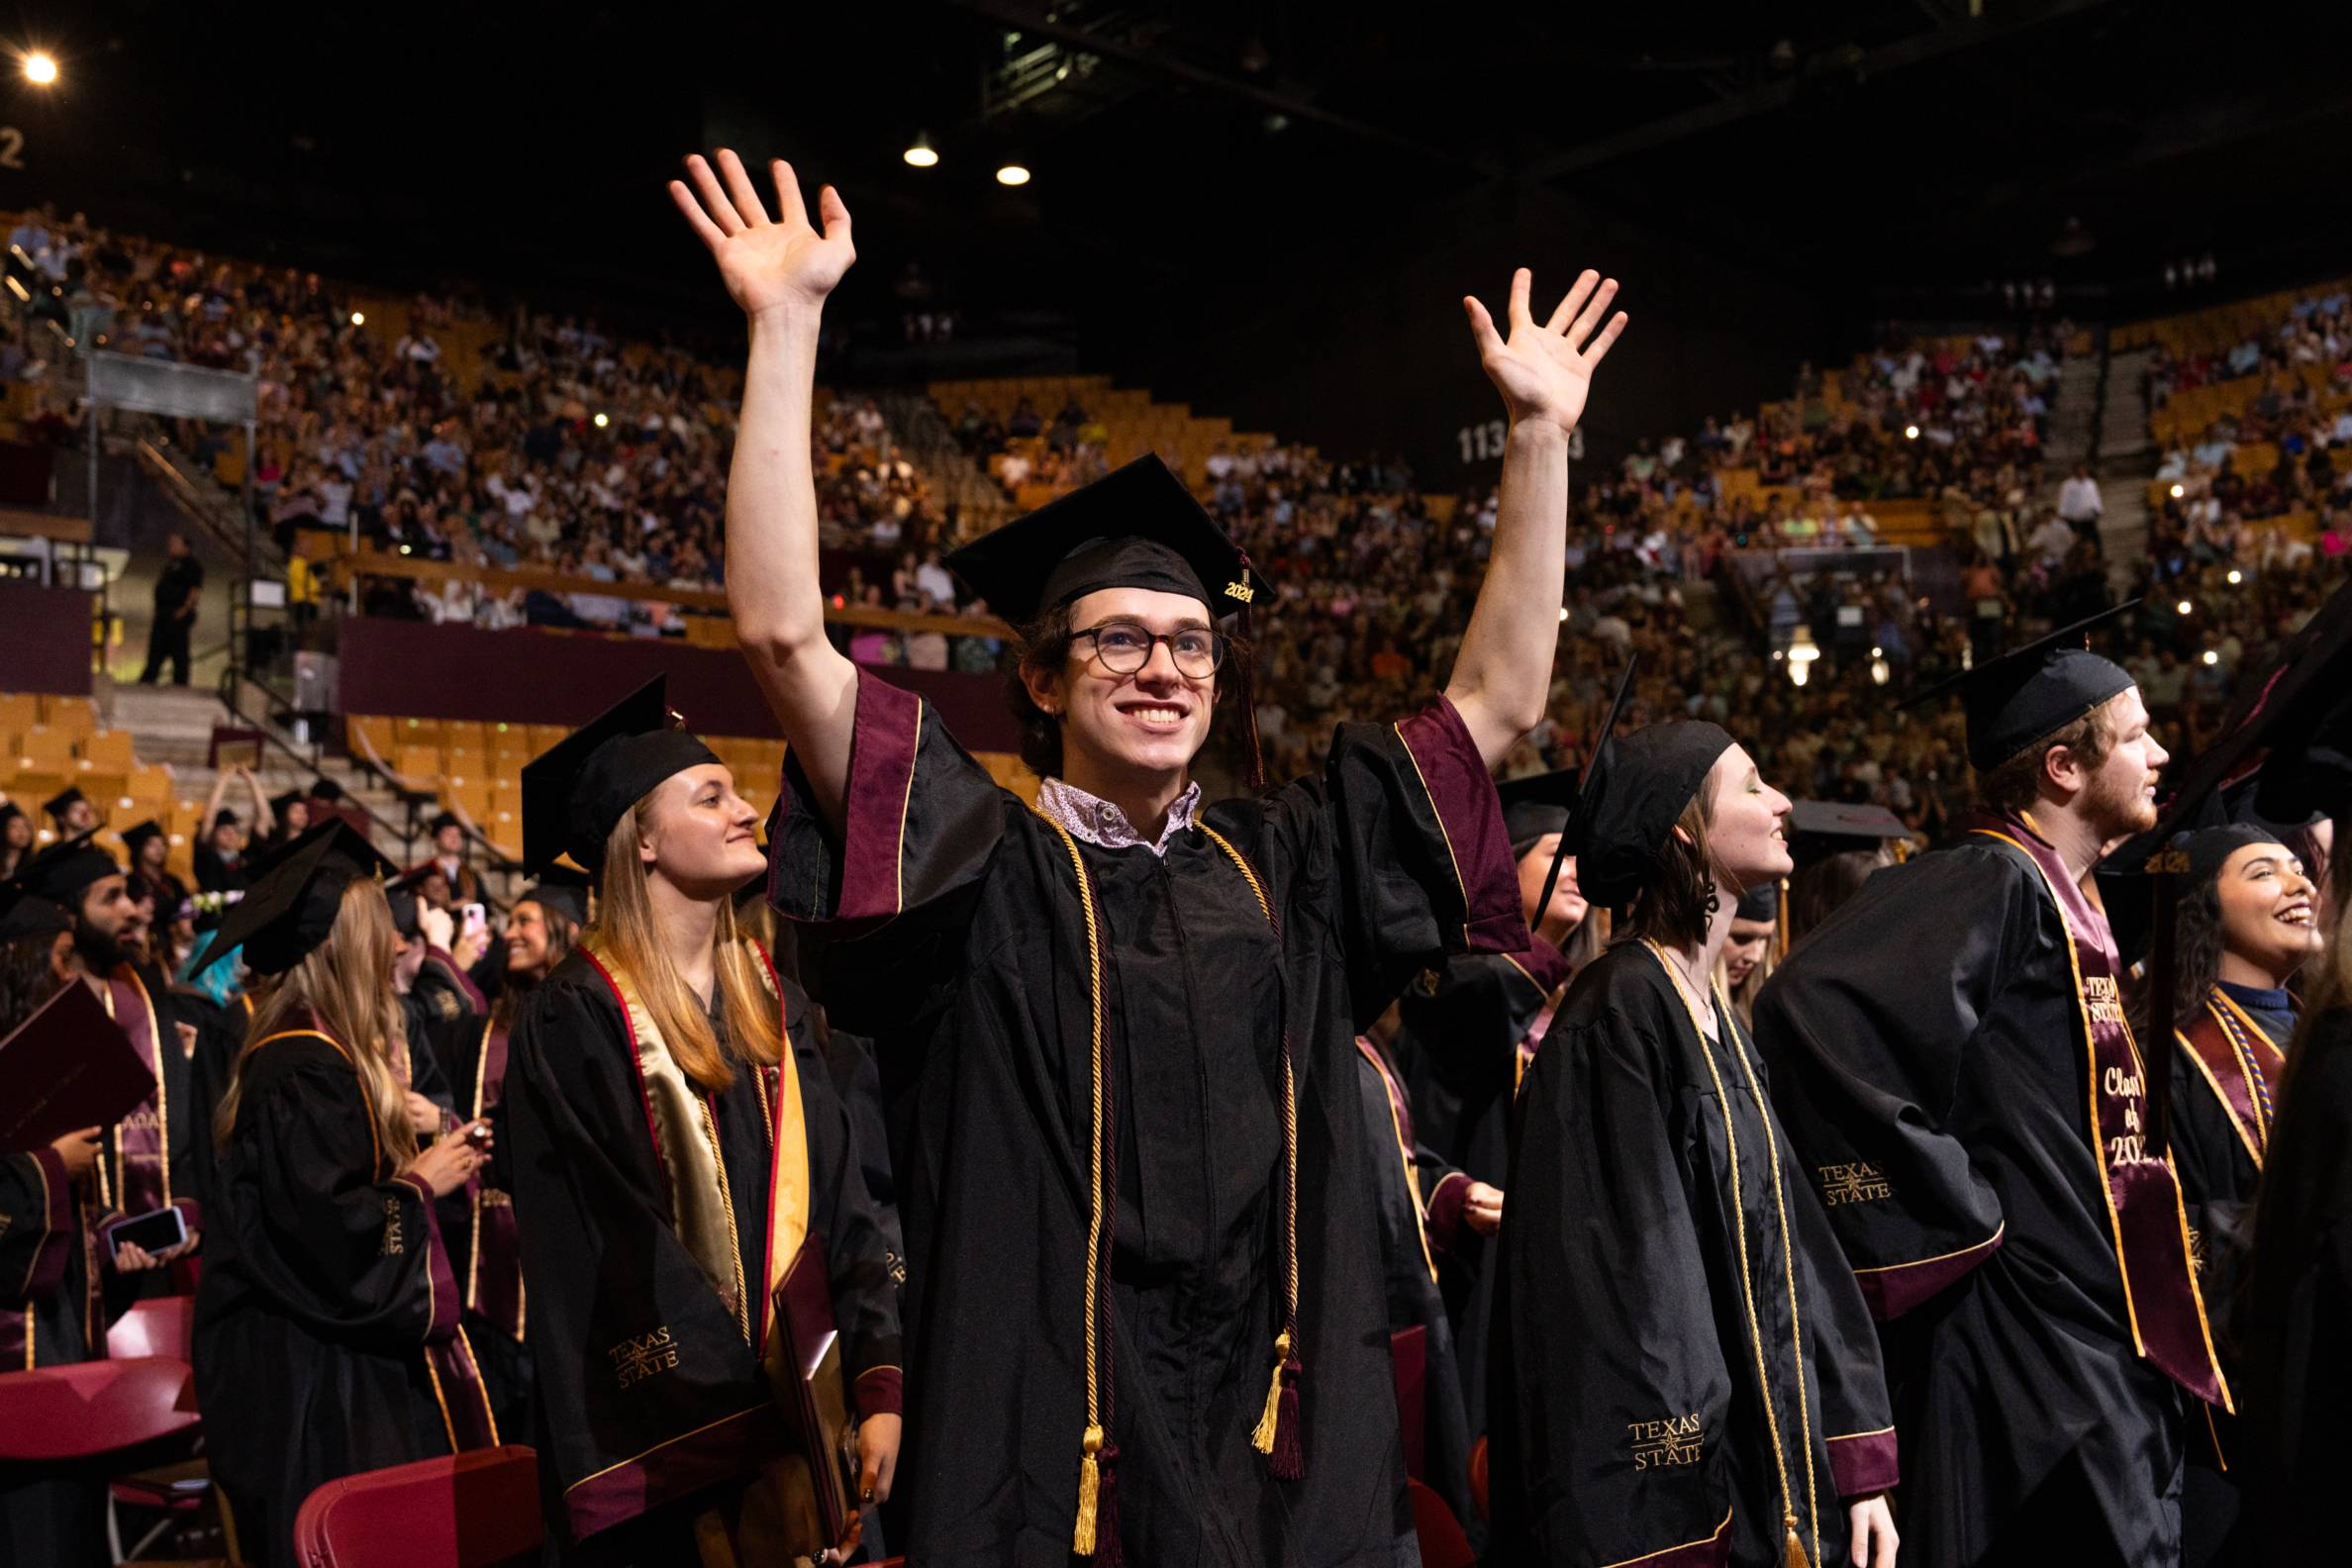 a student waiving during a commencement ceremony